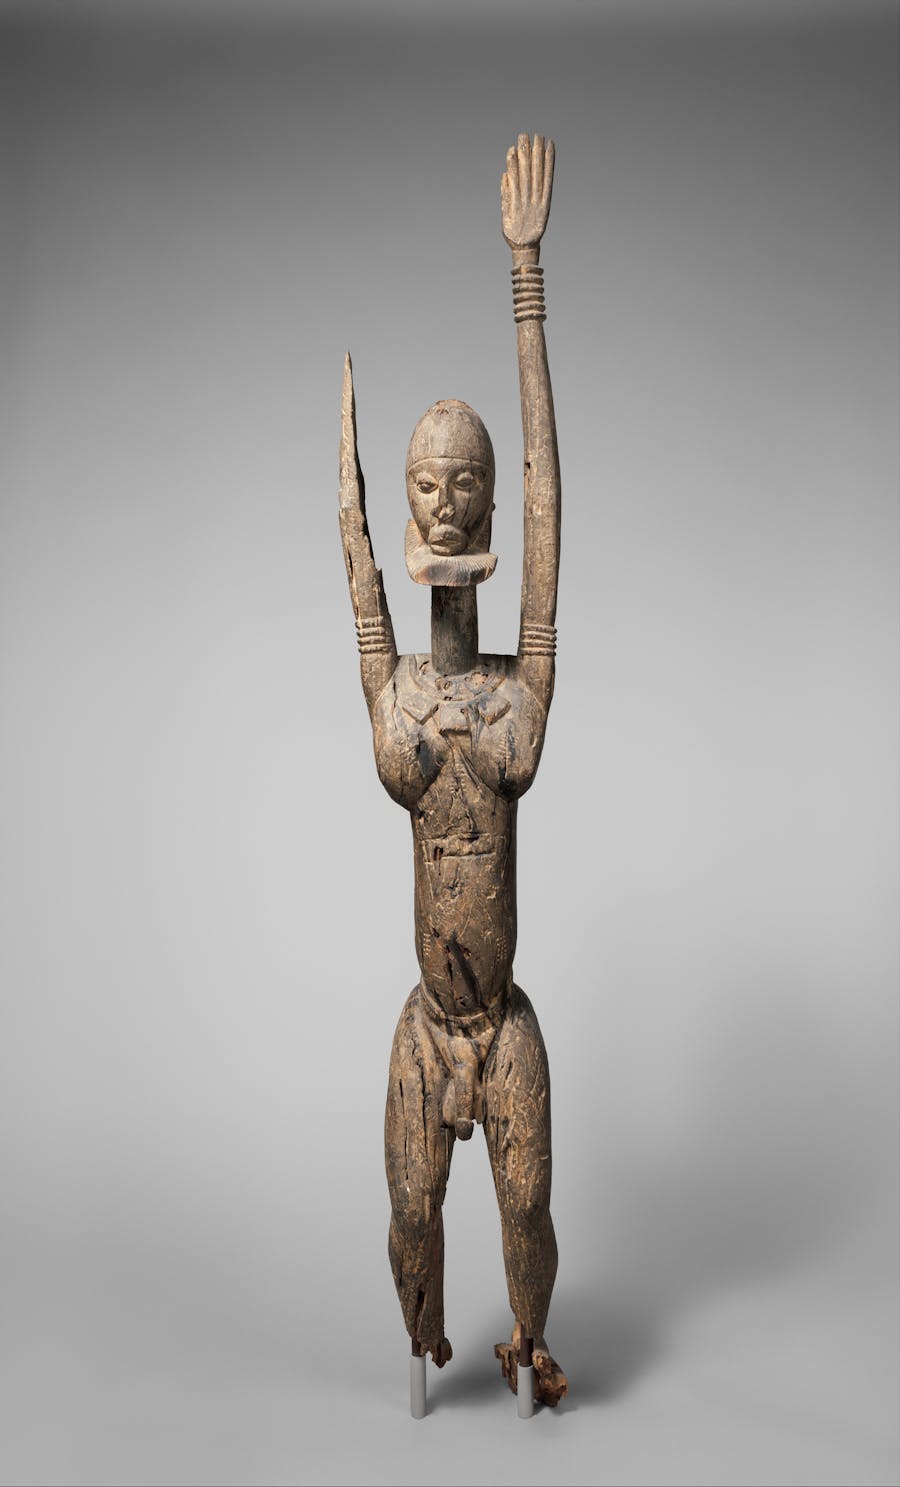 Dogon male figure with raised arms, 14th–17th century, Mali, wood and patina. Public domain image